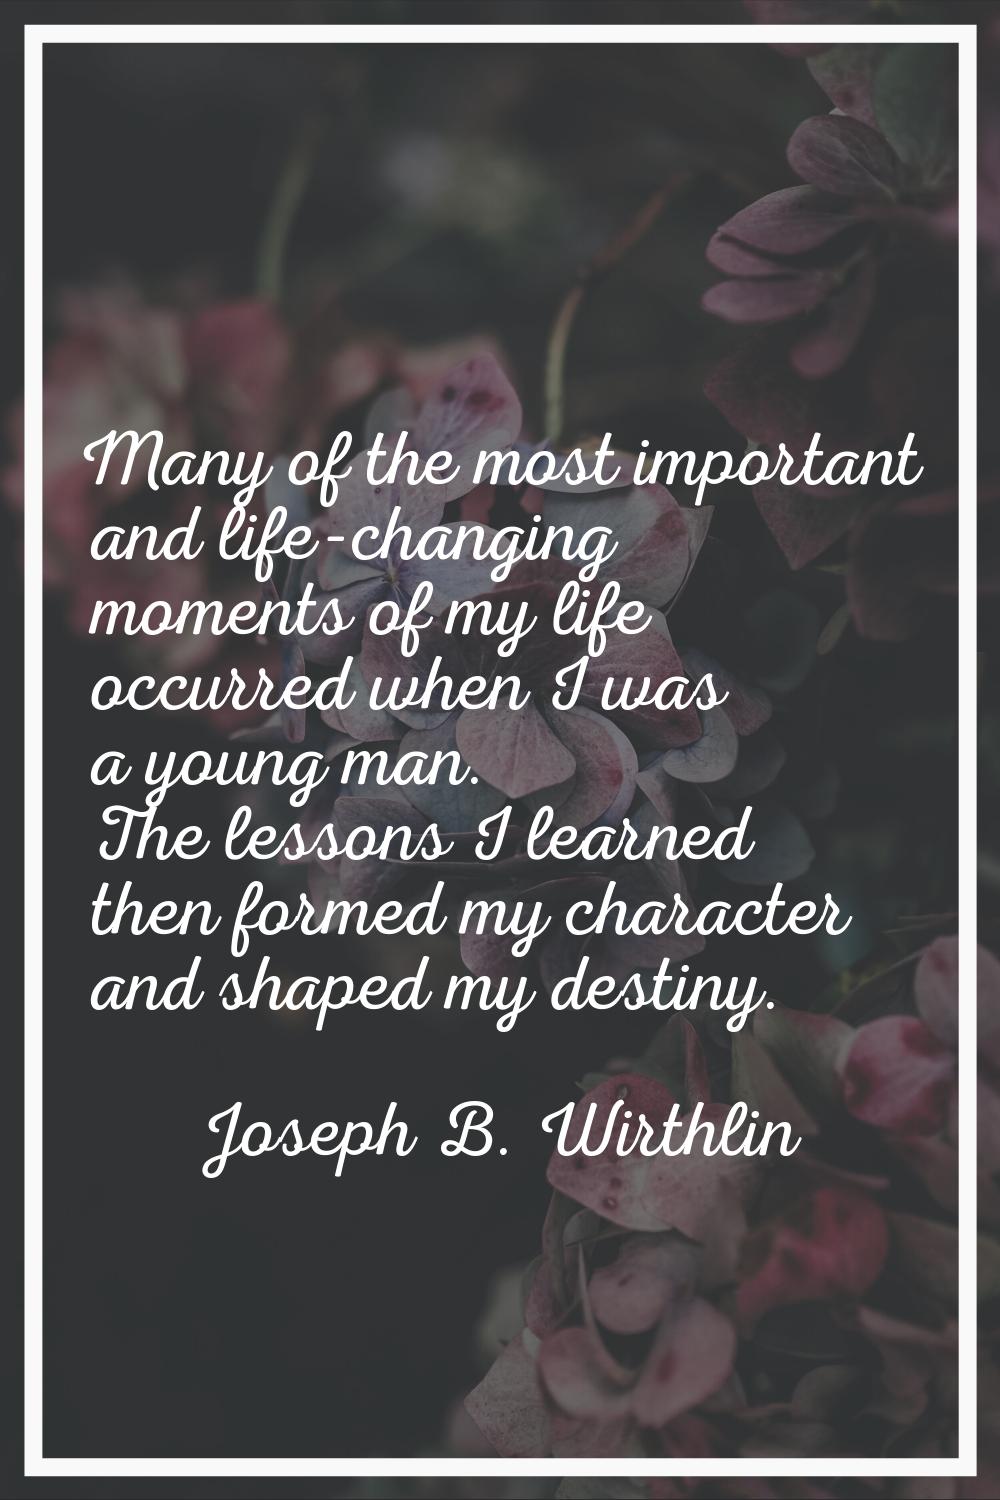 Many of the most important and life-changing moments of my life occurred when I was a young man. Th